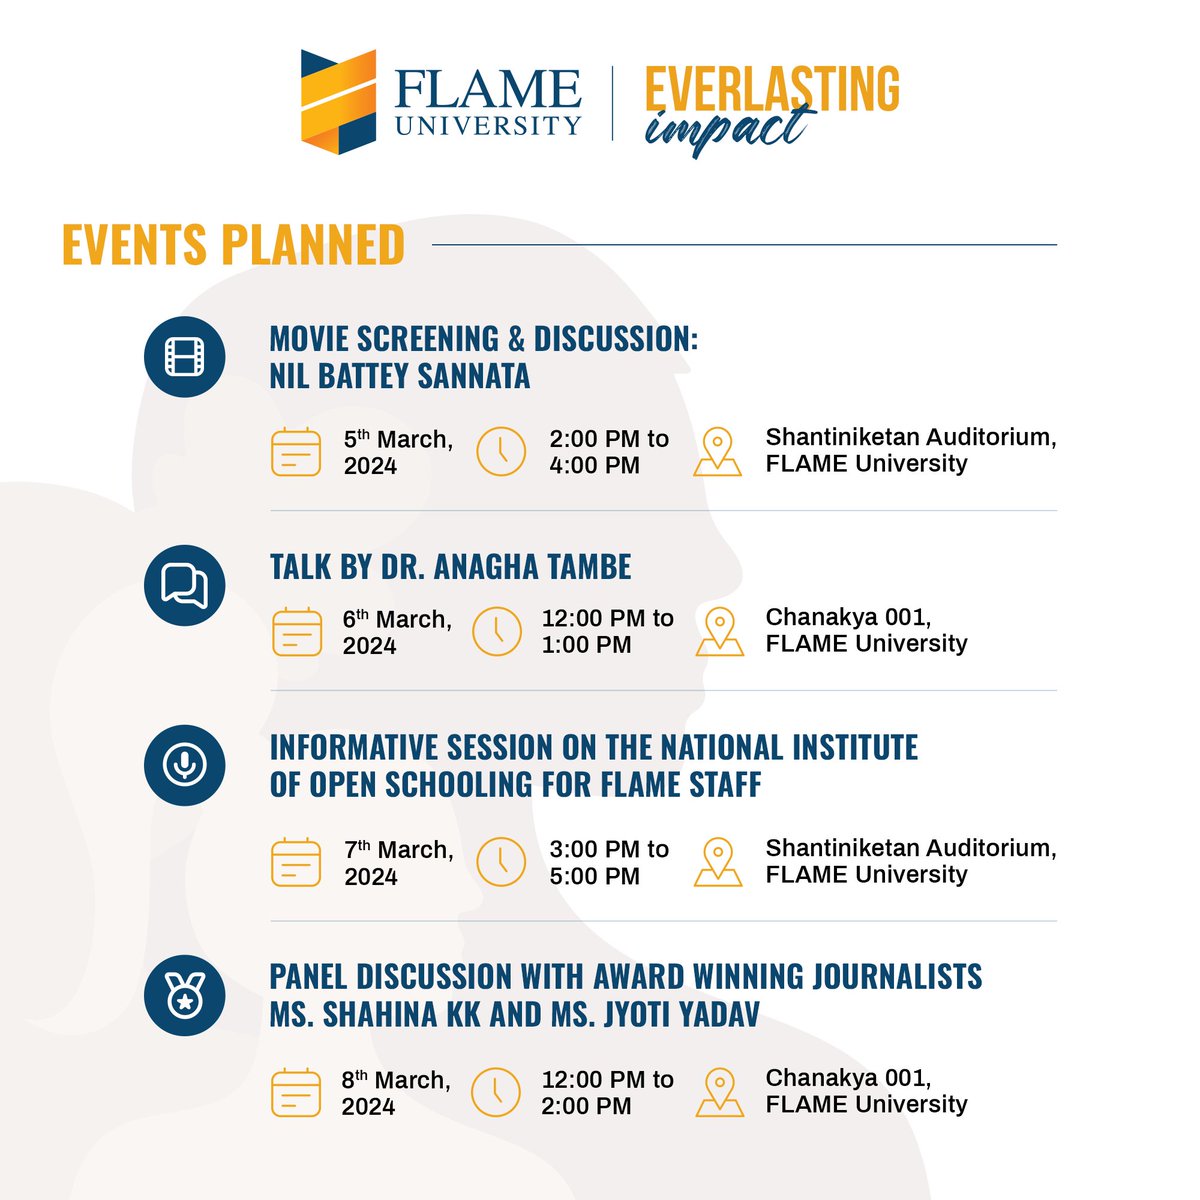 FLAME University’s Women’s Cell invites you to join us in celebrating International Women’s Day from March 5th to March 8th, 2024. We have planned a series of exciting and inspiring events for you, ranging from movie screenings and discussions to talks by eminent speakers and…